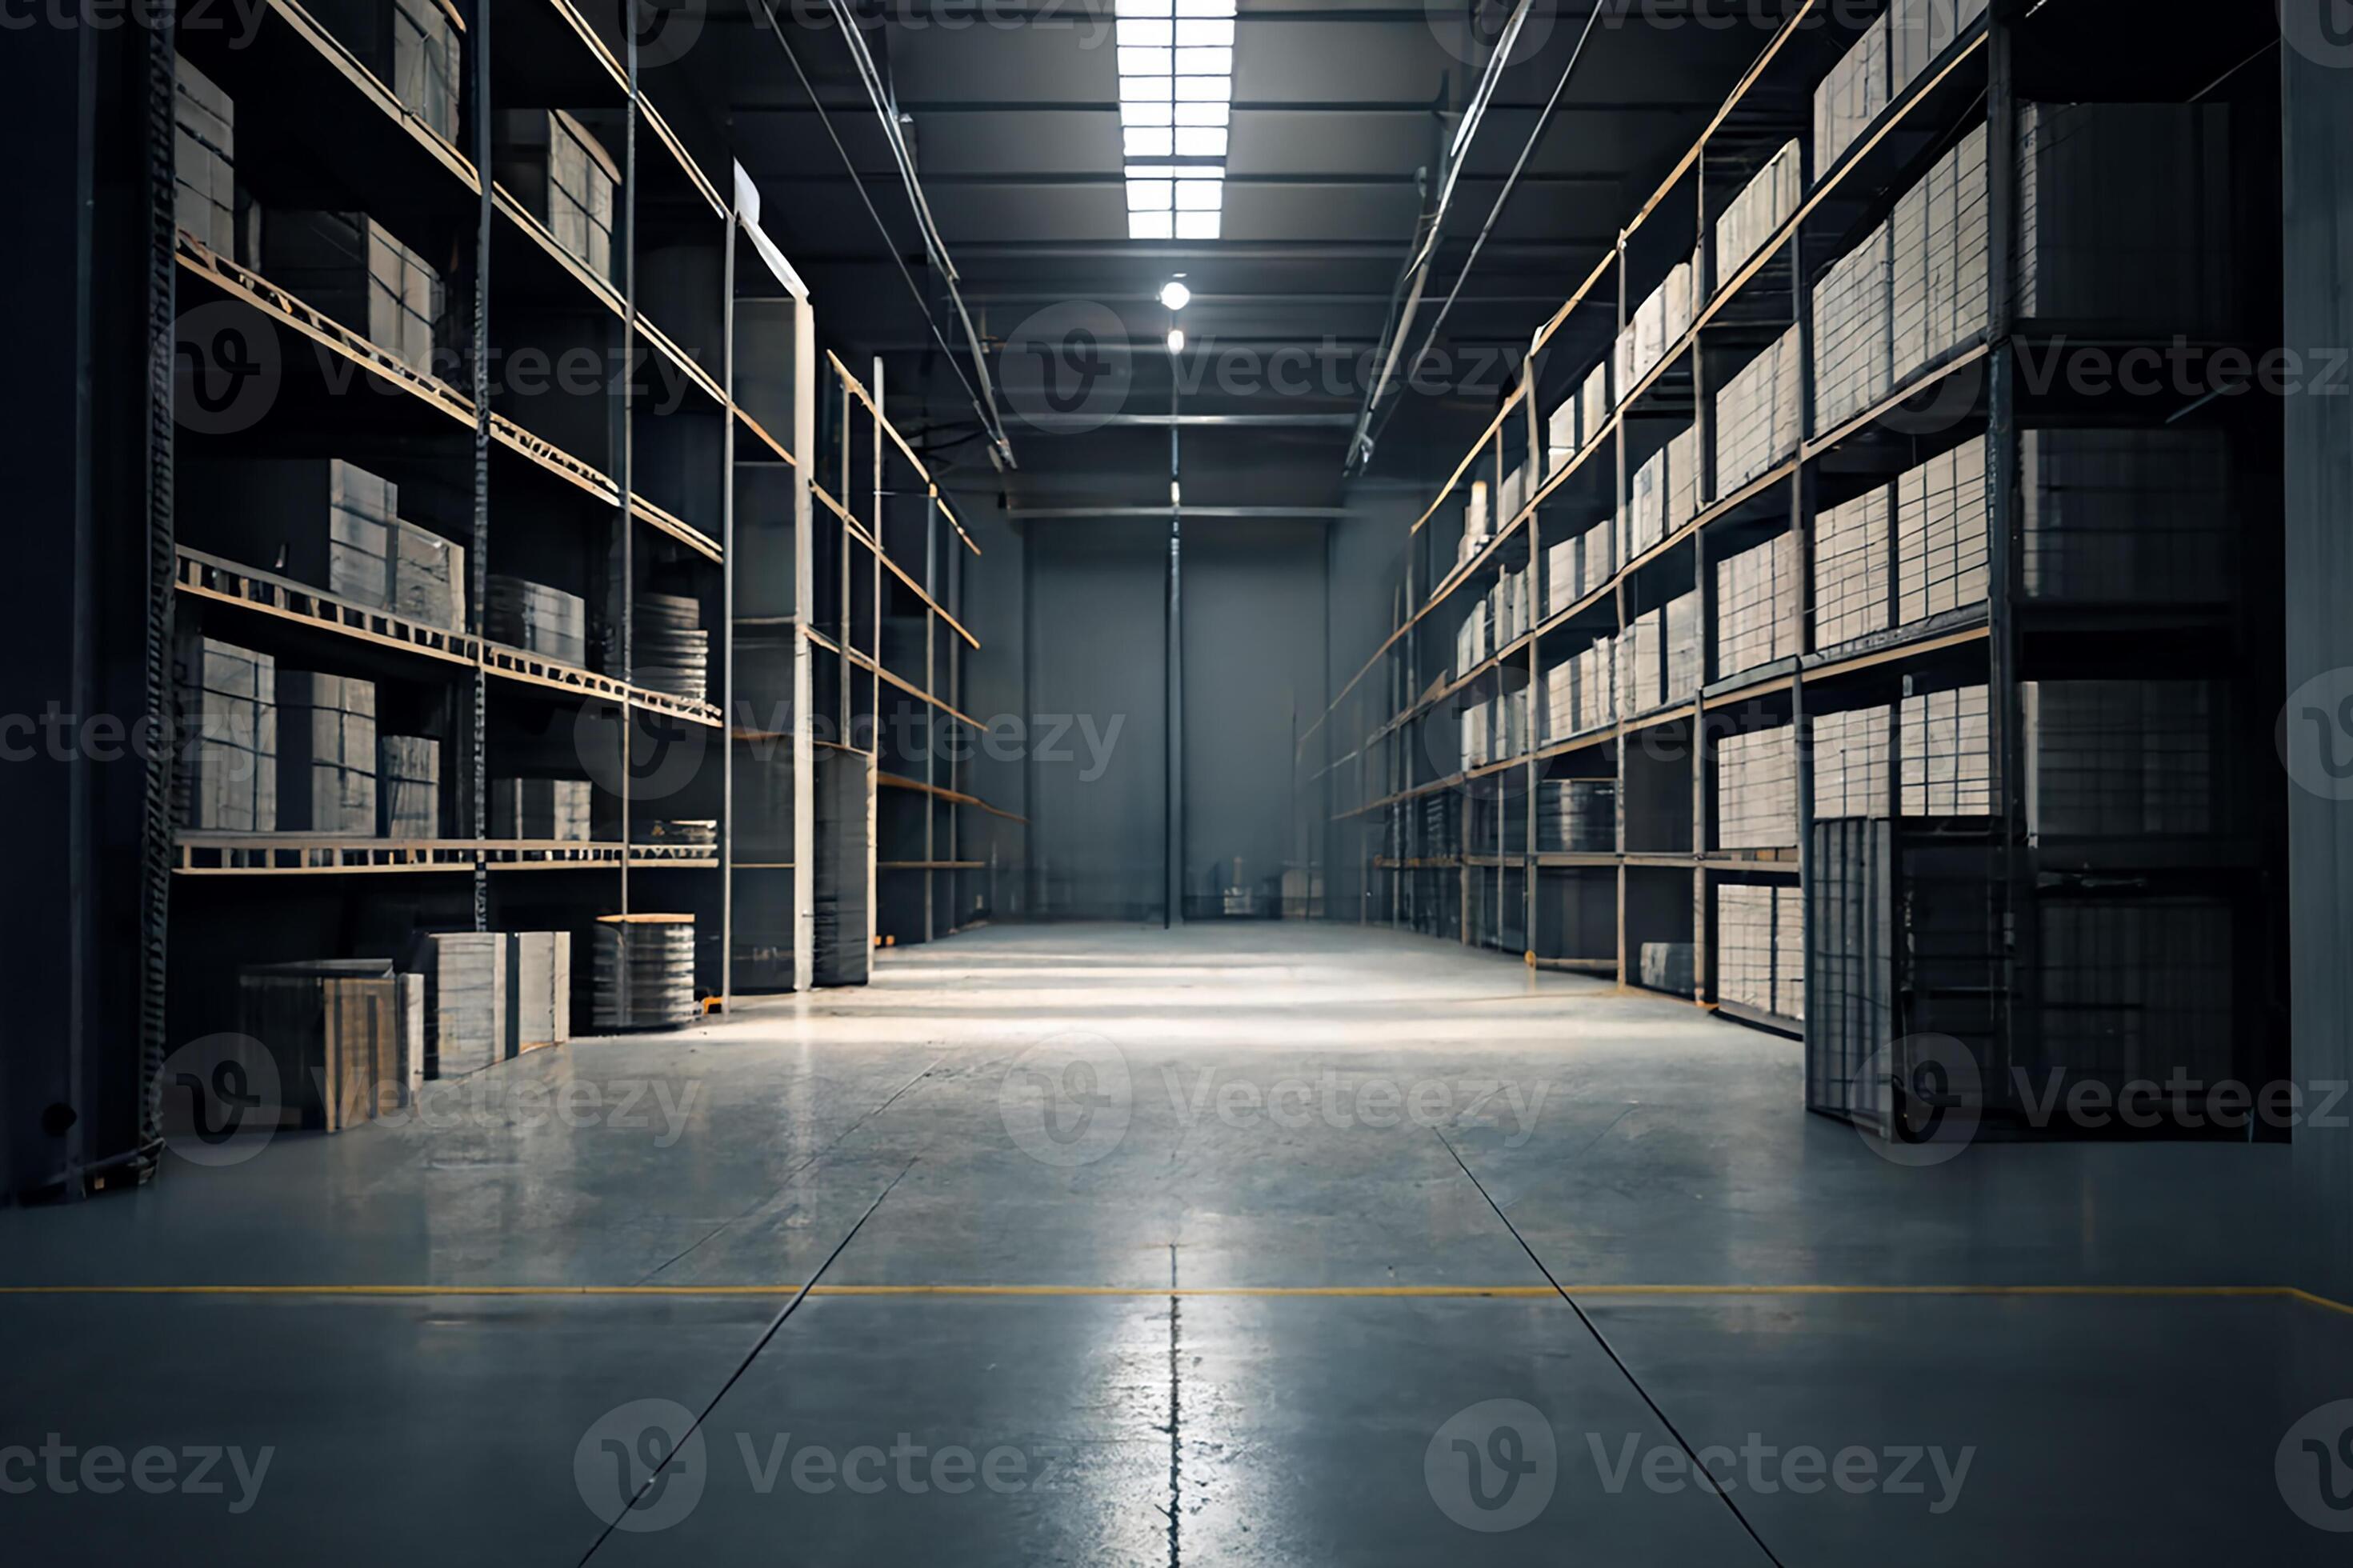 https://static.vecteezy.com/system/resources/previews/022/771/508/large_2x/the-interior-of-the-large-storage-room-with-shelves-racks-and-merchandise-business-background-generative-ai-photo.jpg